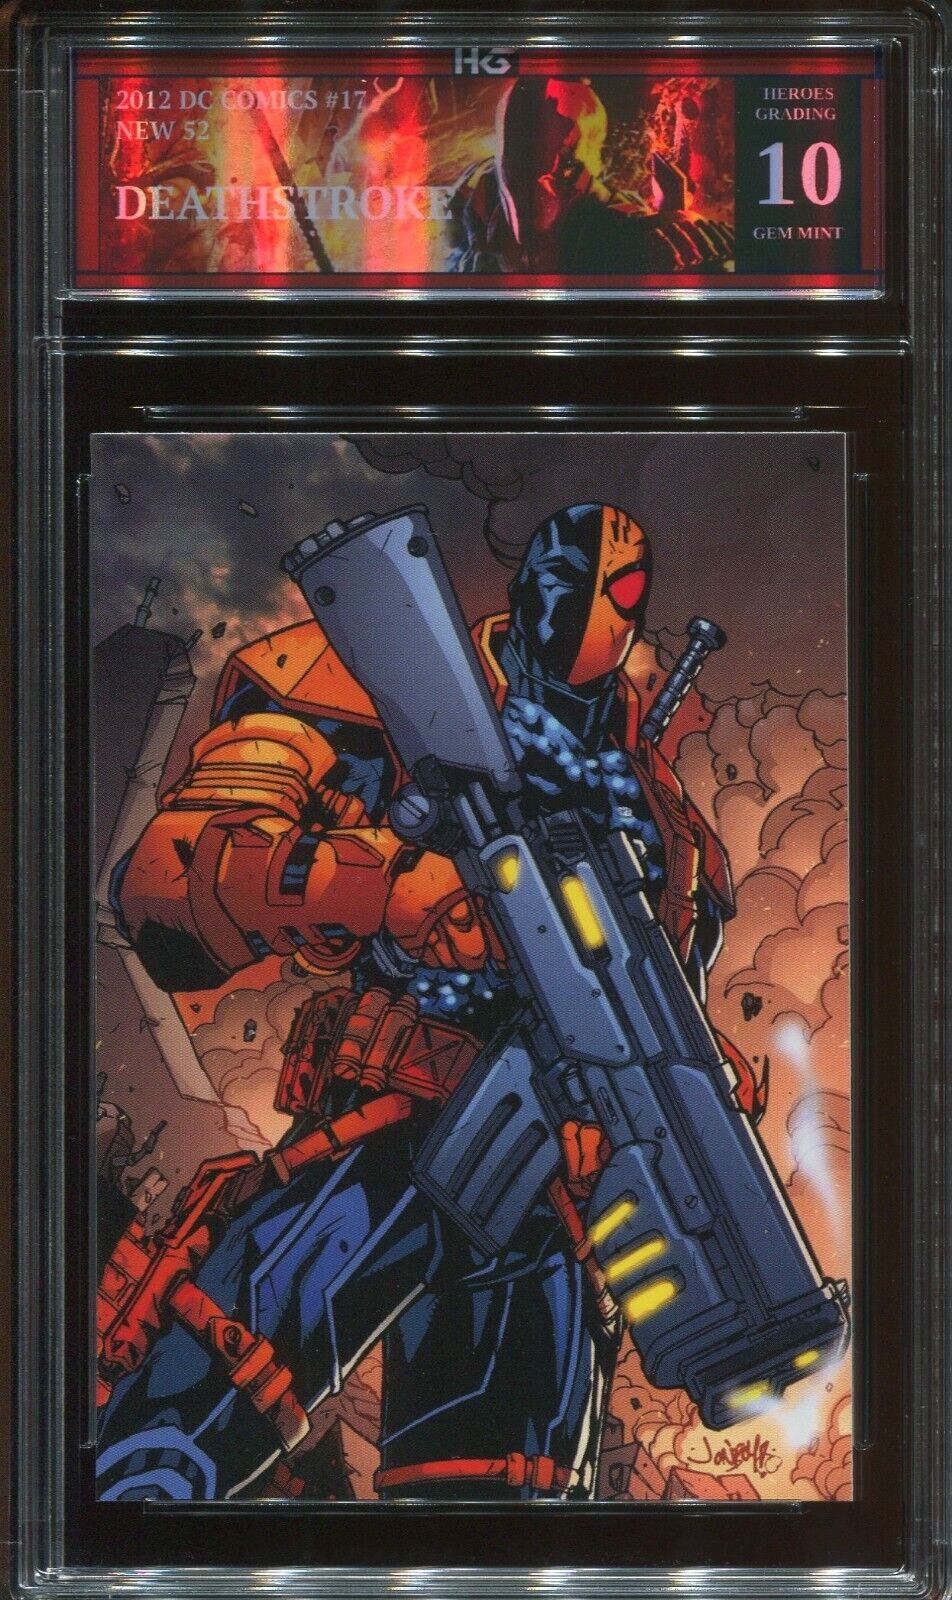 2012 CRYPTOZOIC DC COMICS THE NEW 52 DEATHSTROKE #17 HEROES GRADING GEM MINT 10